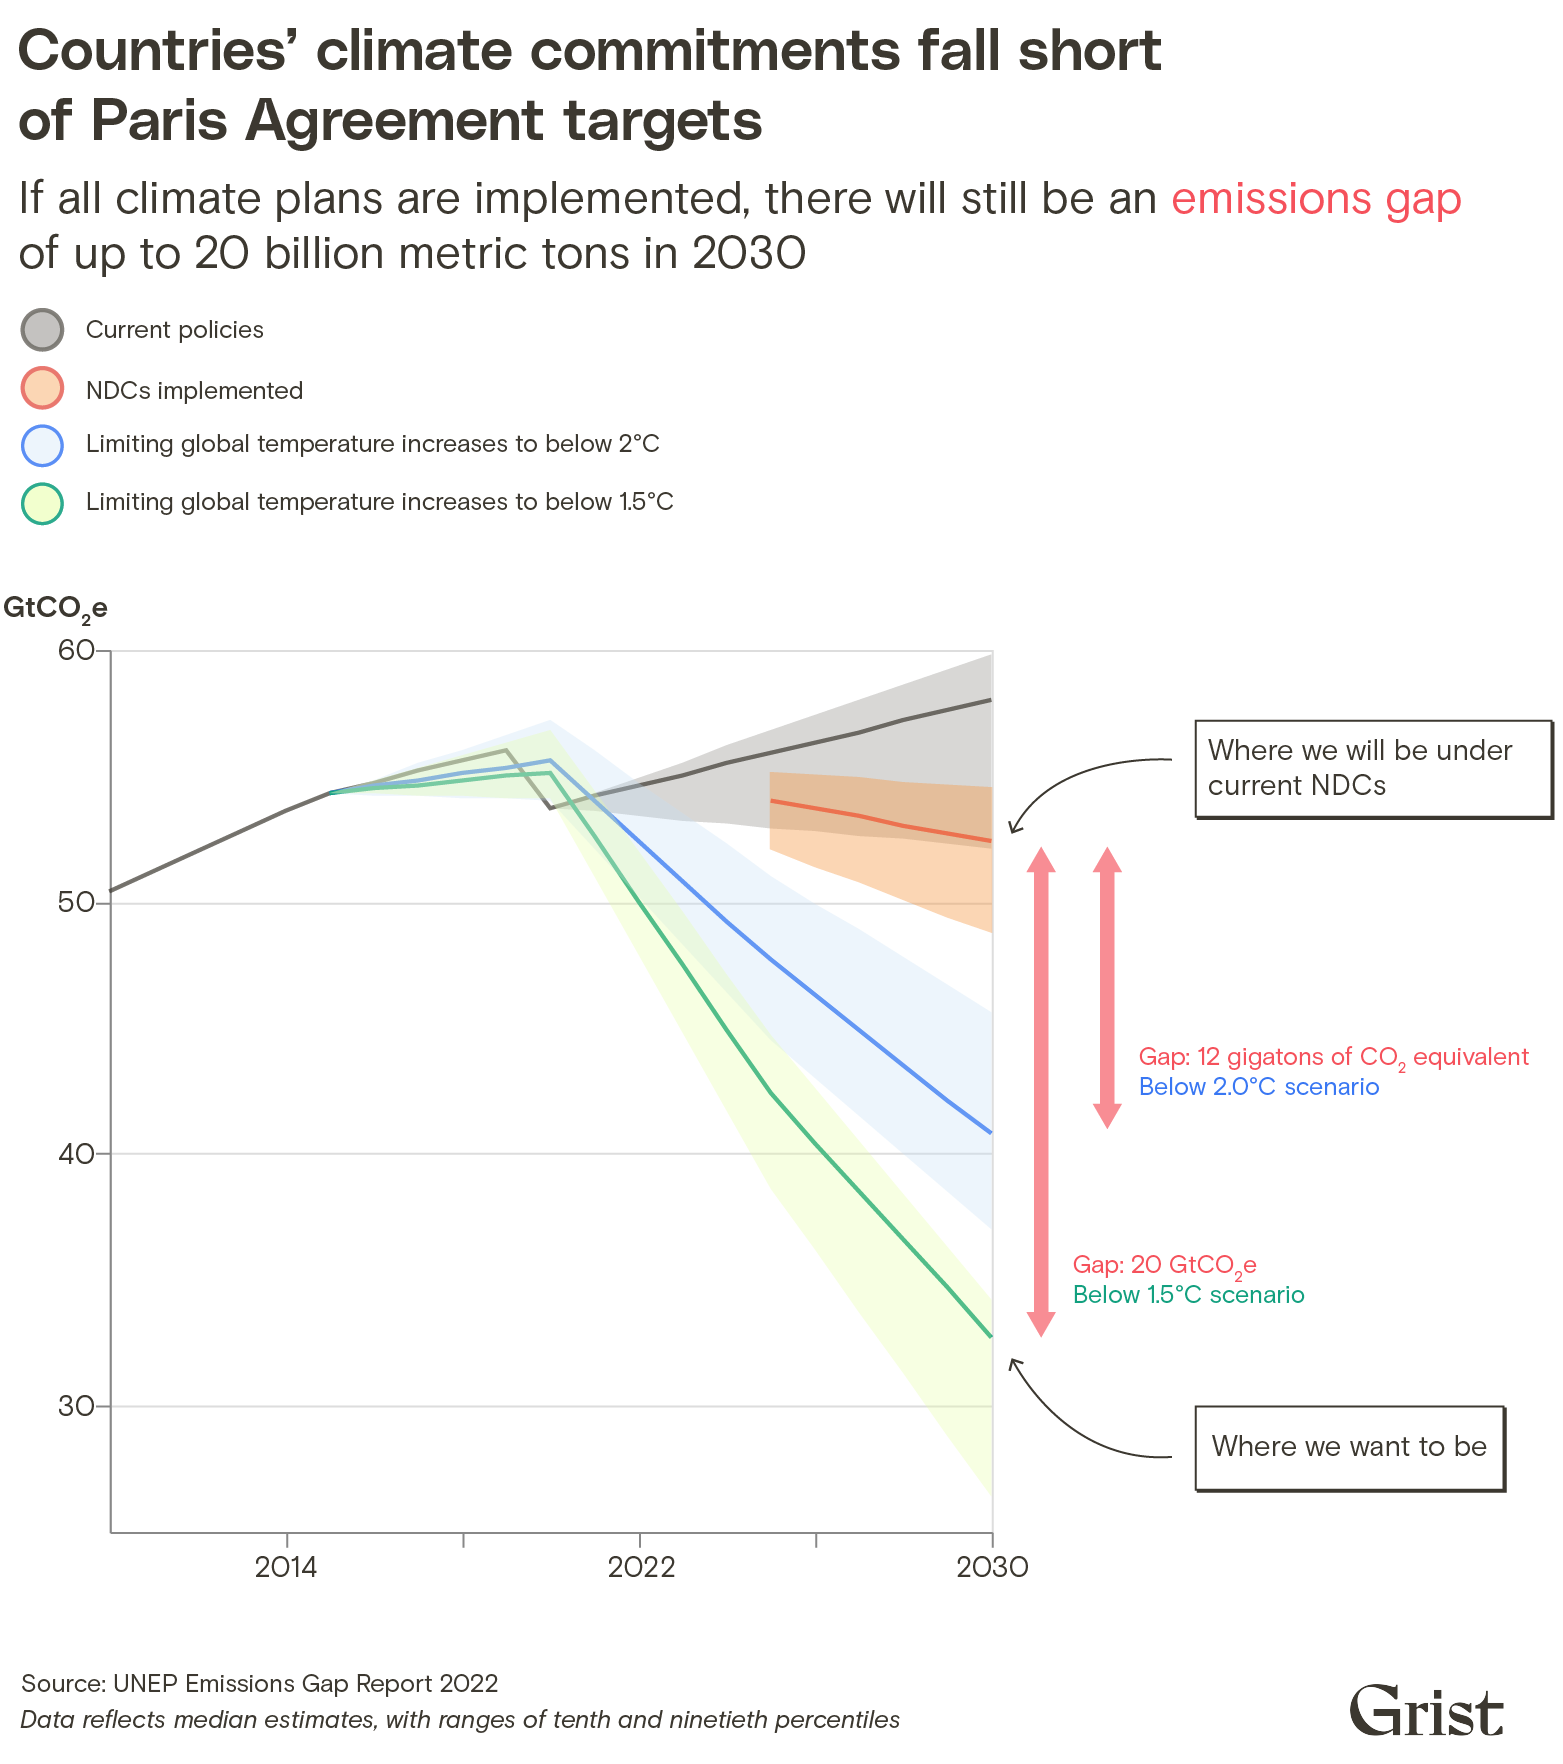 Multi-line chart showing emissions levels under current and future policies.